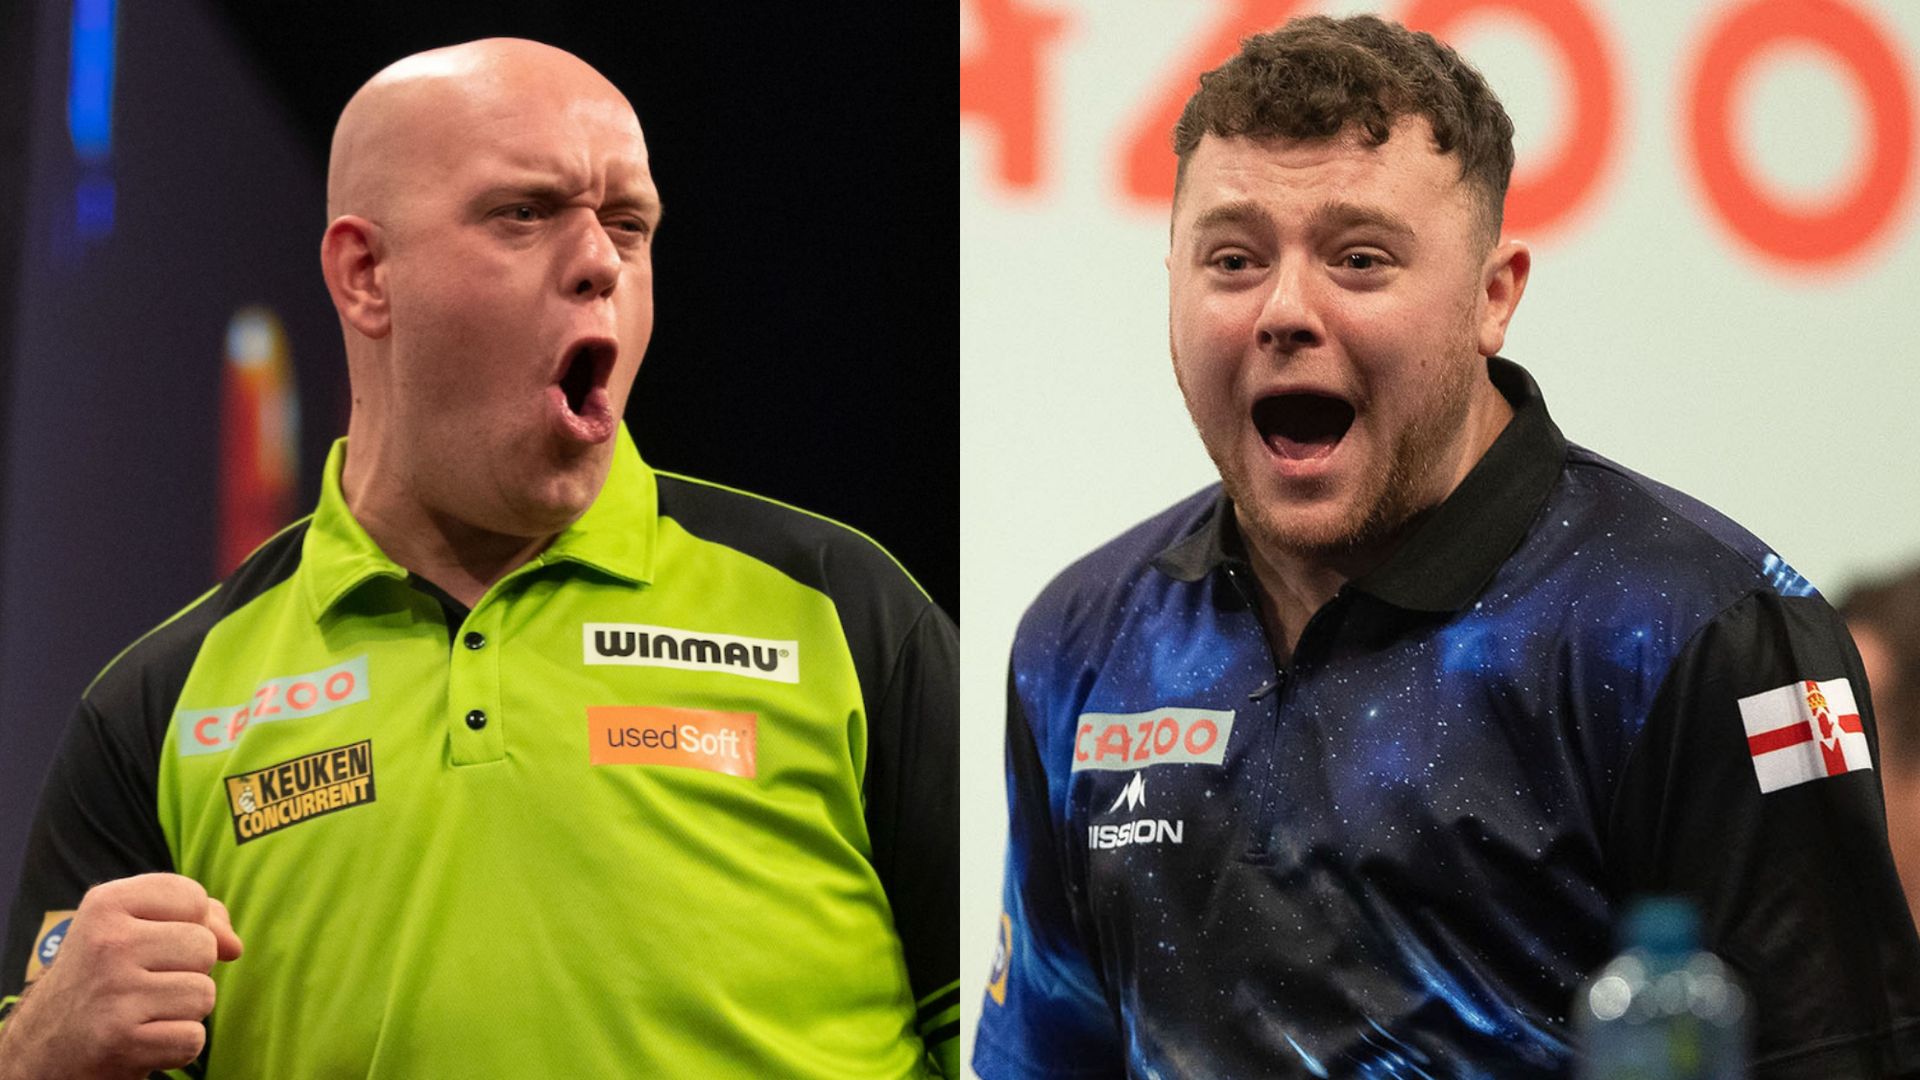 Grand Slam of Darts LIVE! MVG vs Rock headlines with Aspinall & Clayton additionally playingSkySports | Information